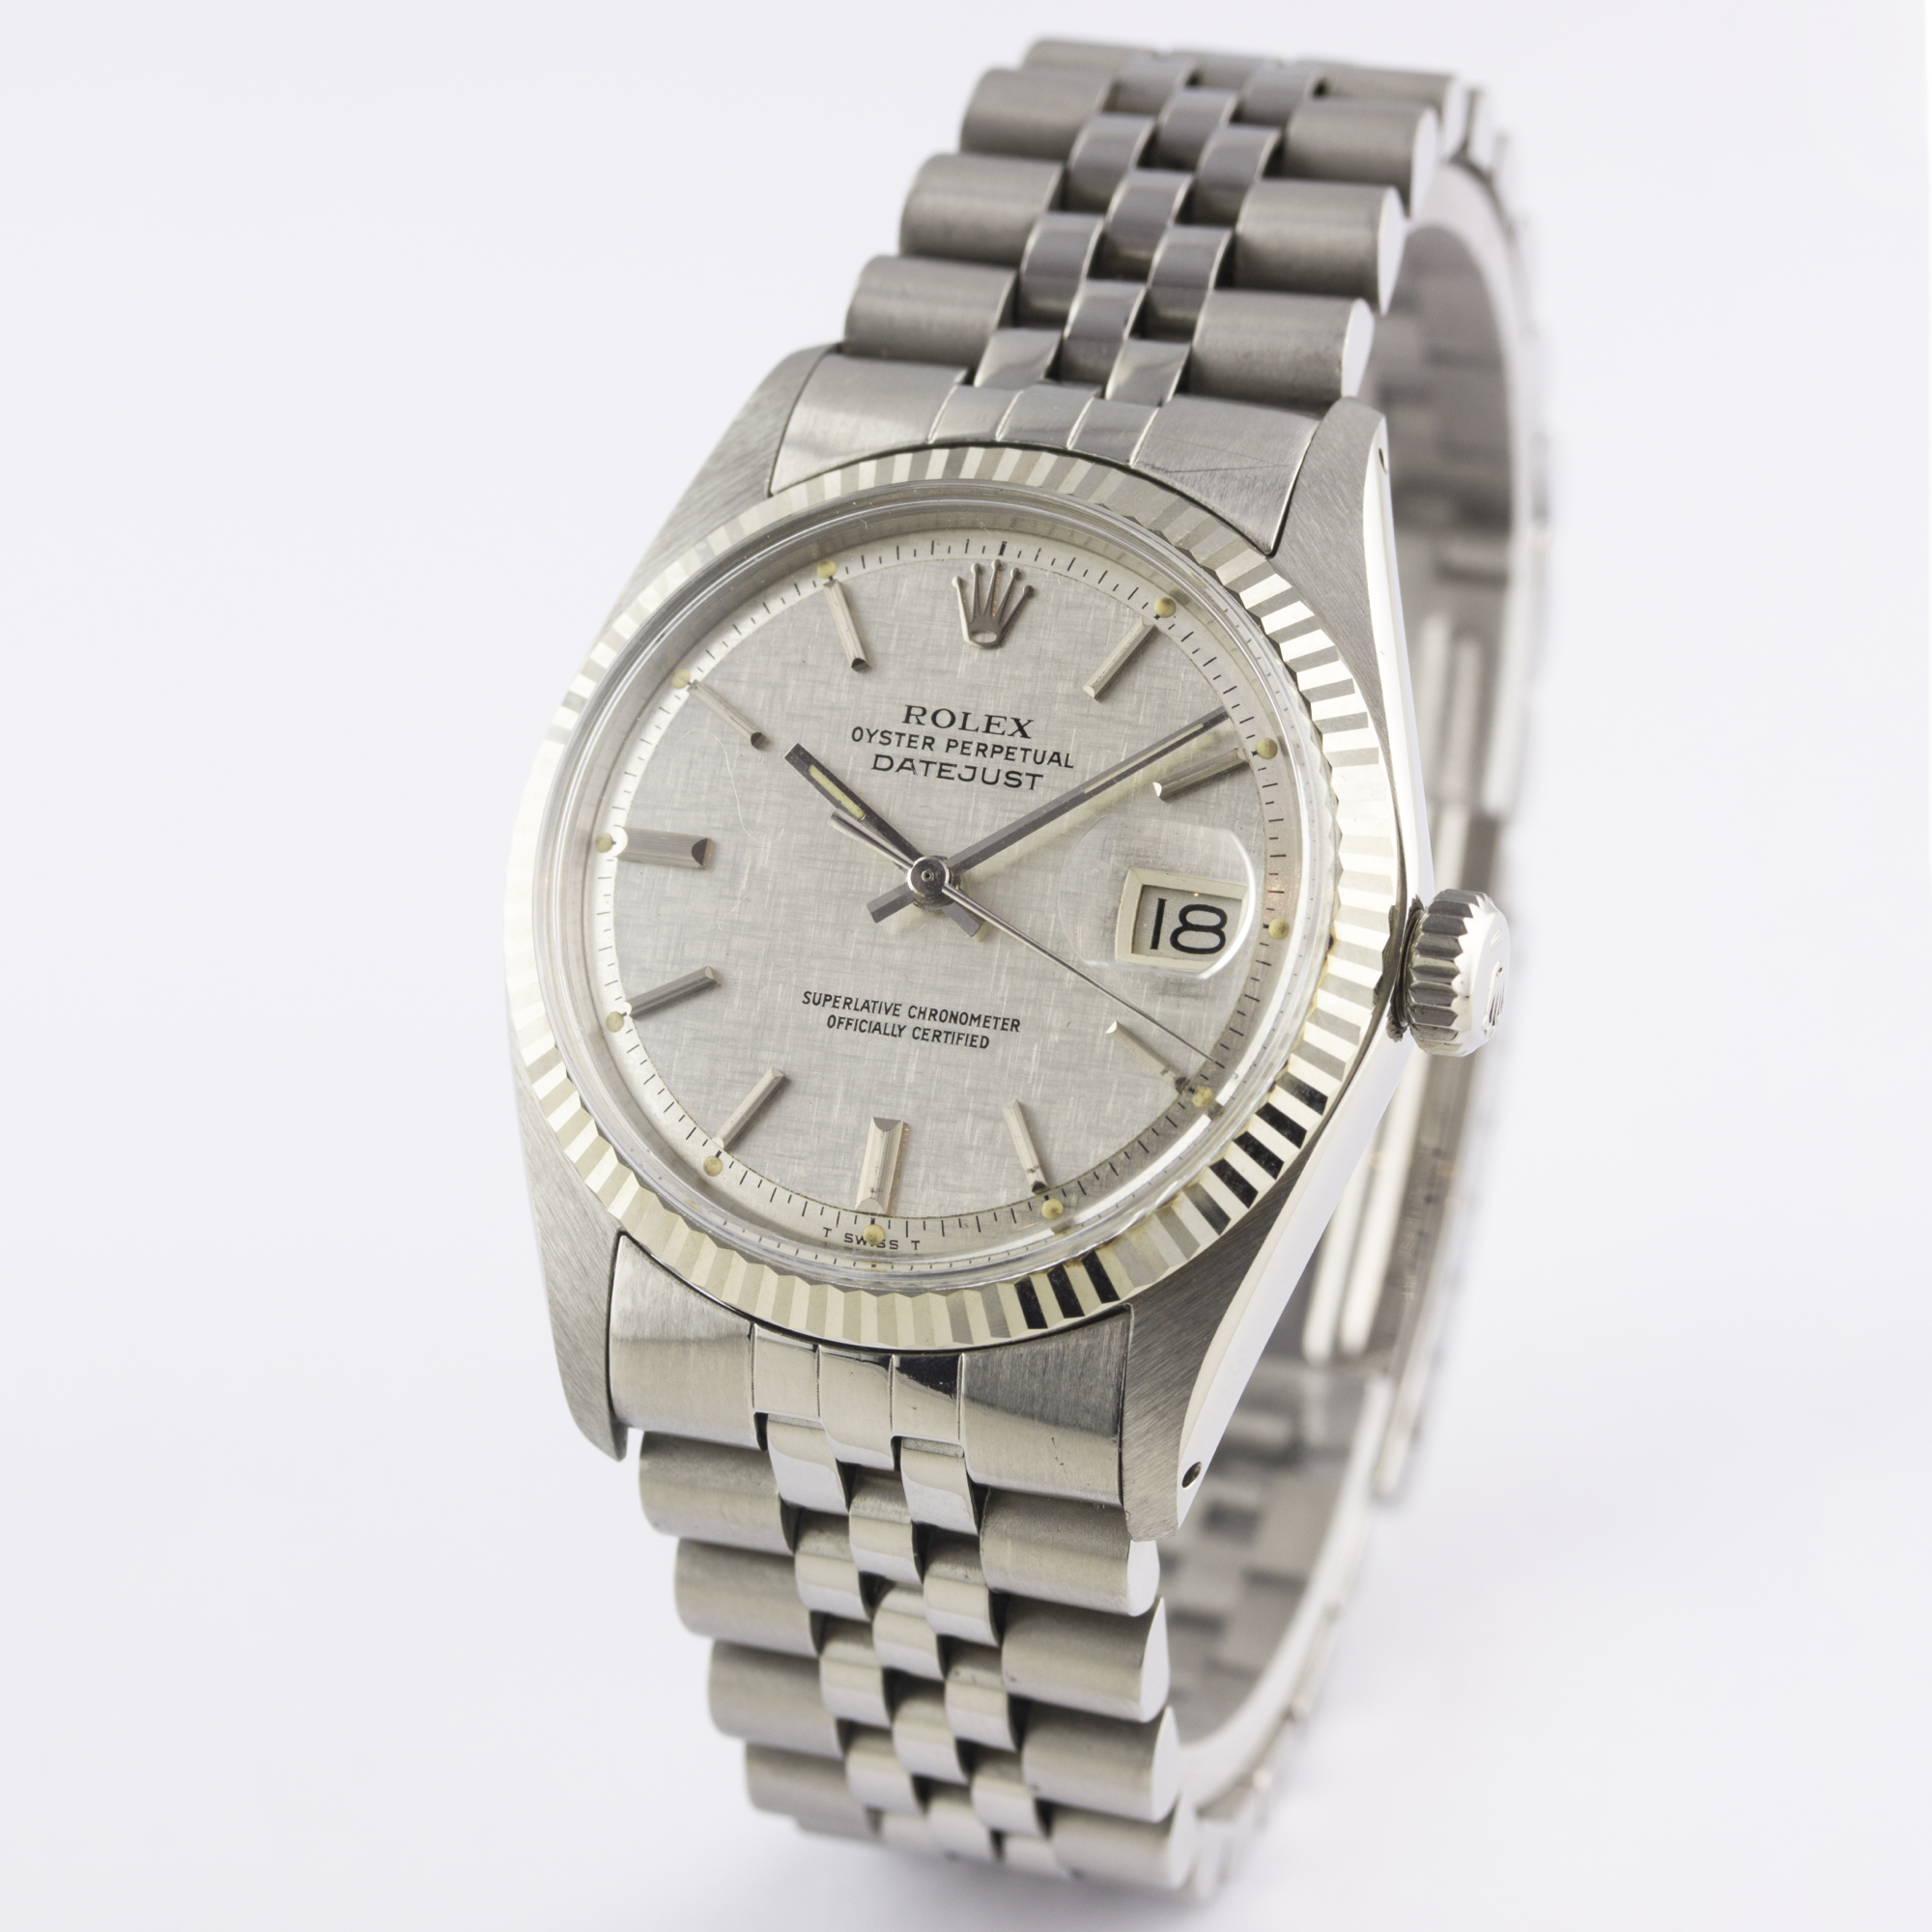 A GENTLEMAN'S STEEL & WHITE GOLD ROLEX OYSTER PERPETUAL DATEJUST BRACELET WATCH CIRCA 1977, REF. - Image 4 of 9